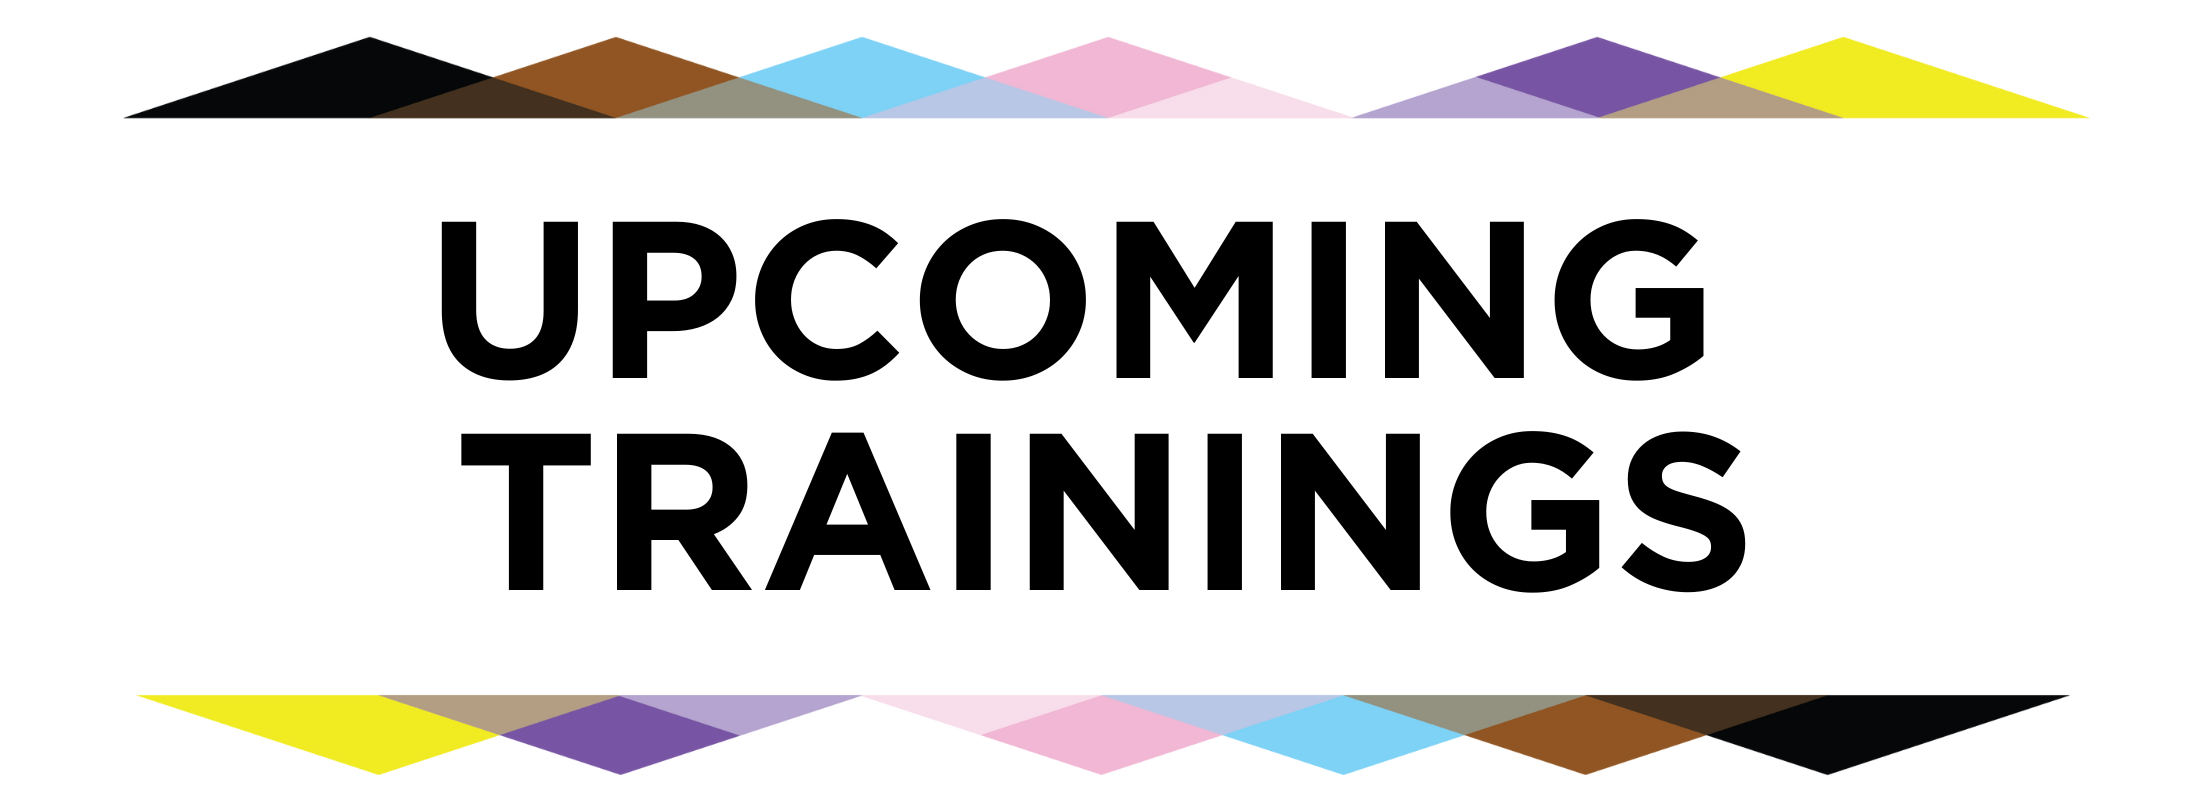 upcoming trainings with rainbow triangles icons